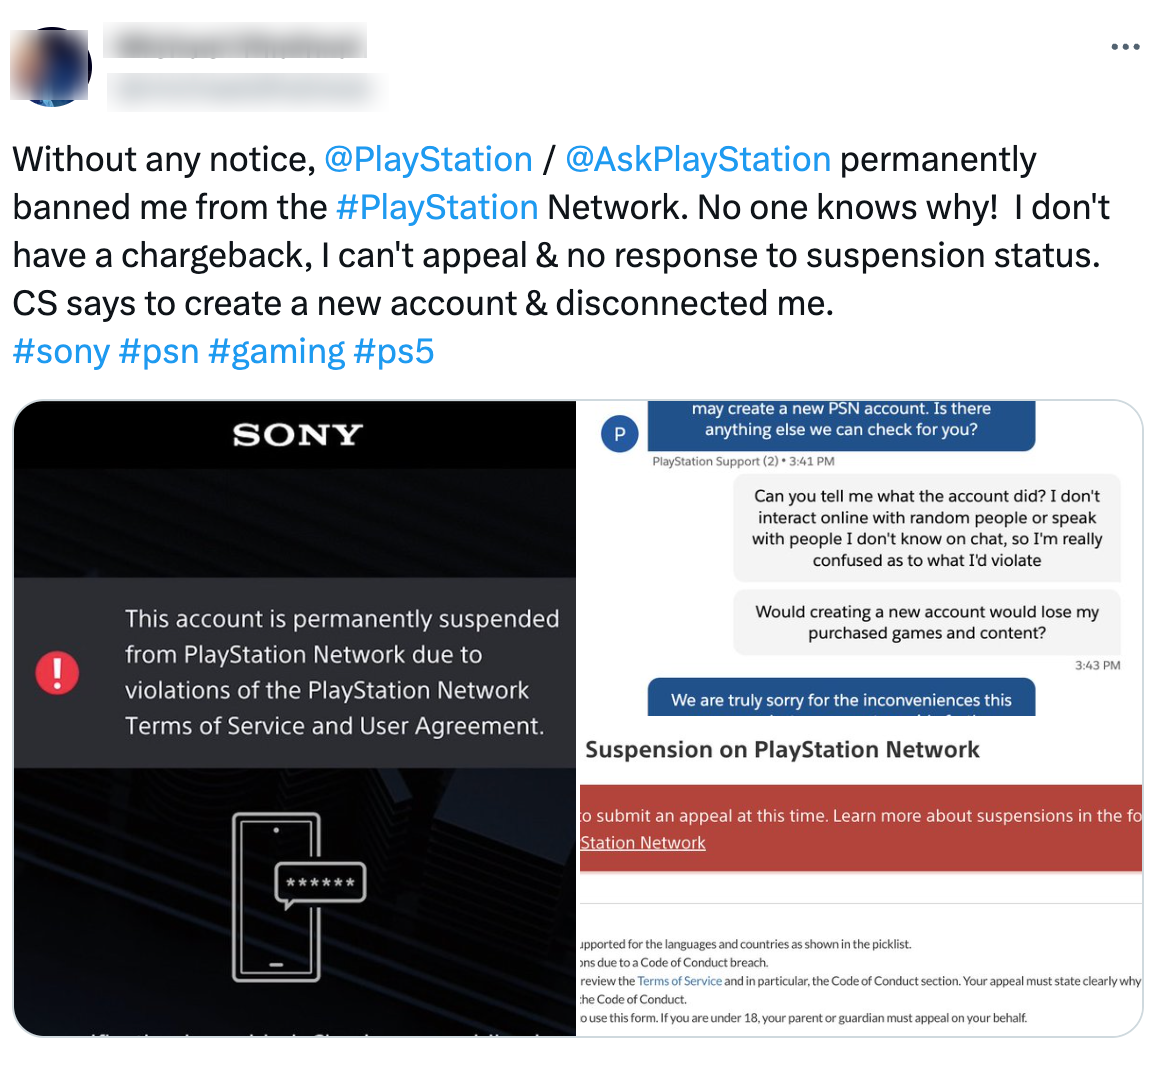 PlayStation appeal or how to appeal a PlayStation ban